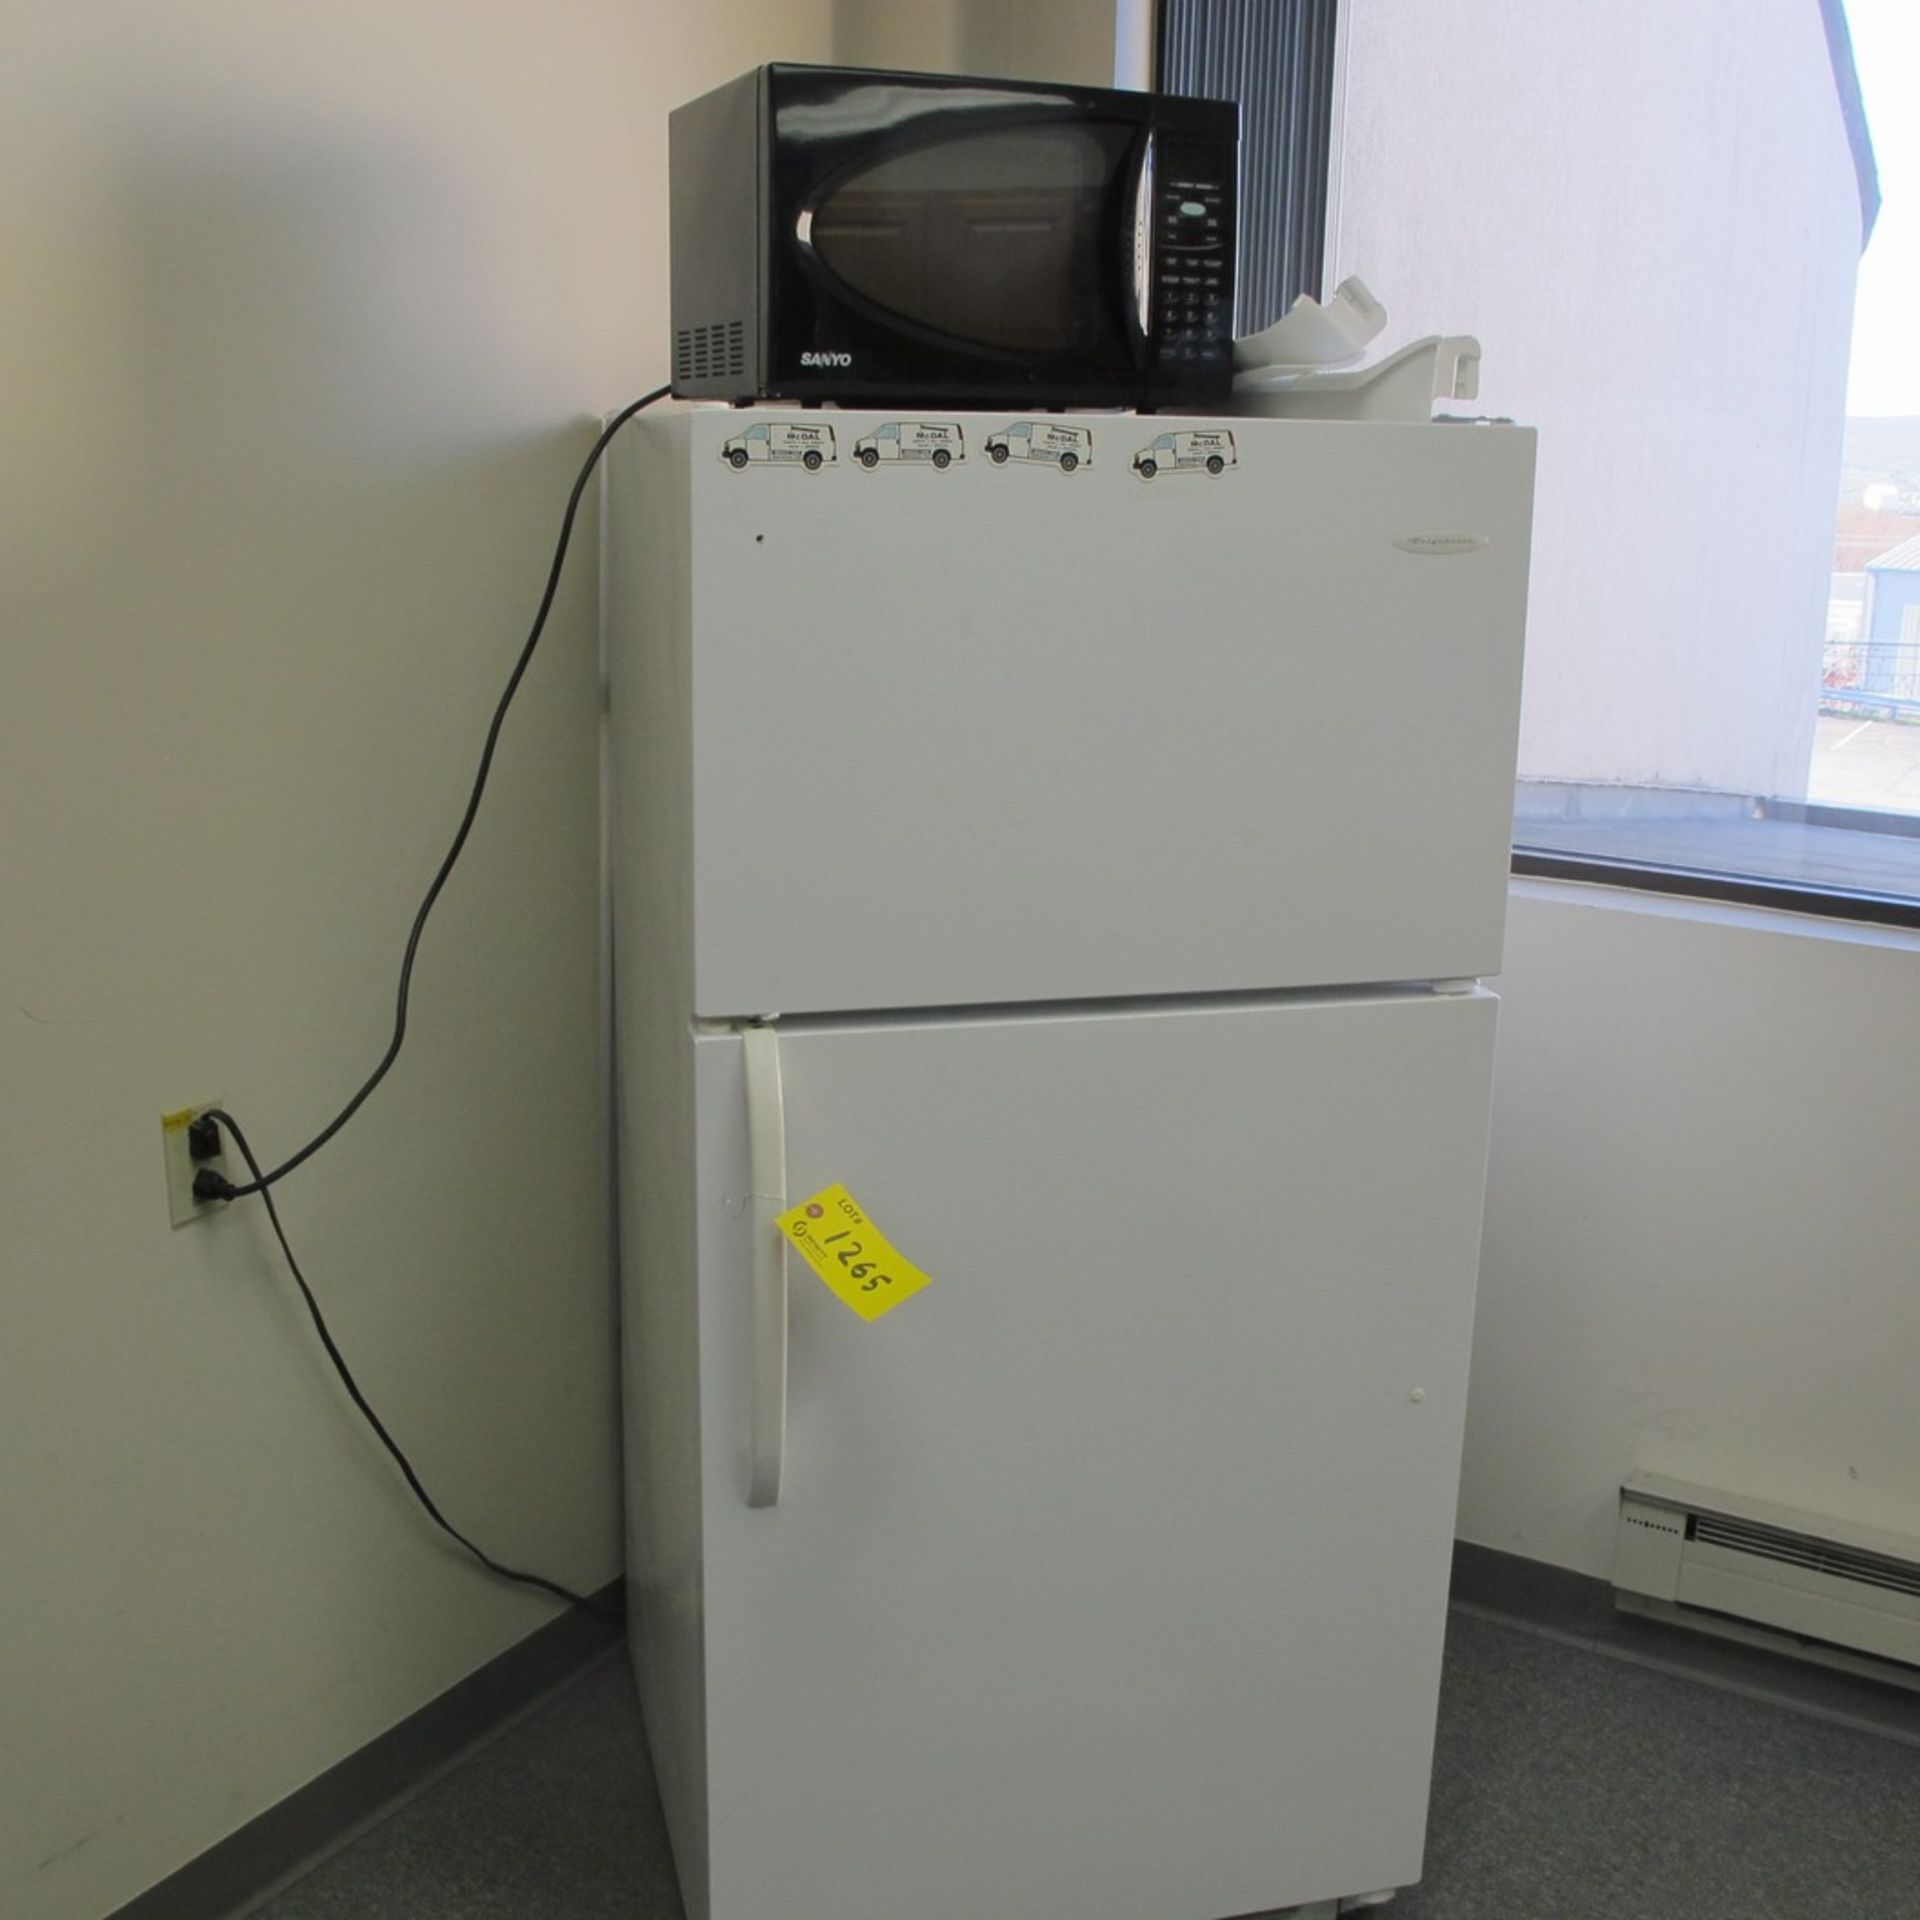 FRIGIDAIRE FRIDGE, SANYO MICROWAVE, KEURIG COFFEE MAKER (NO CONTENTS) (UPPER EAST OFFICES)